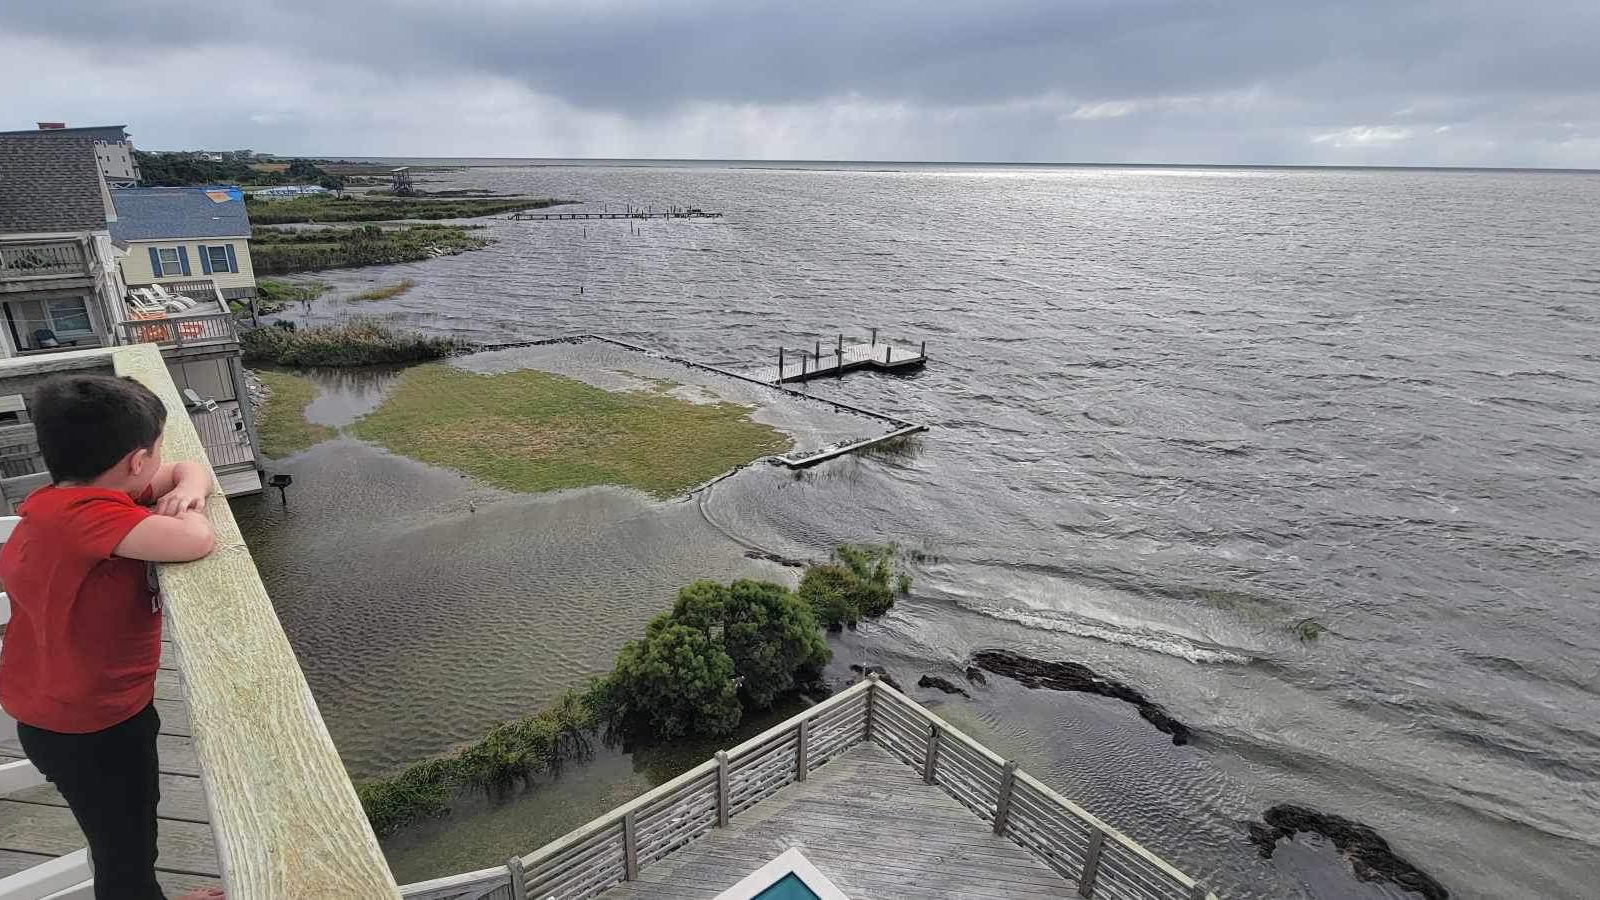 Soundside flooding has receded along parts of Outer Banks as Ophelia moves away